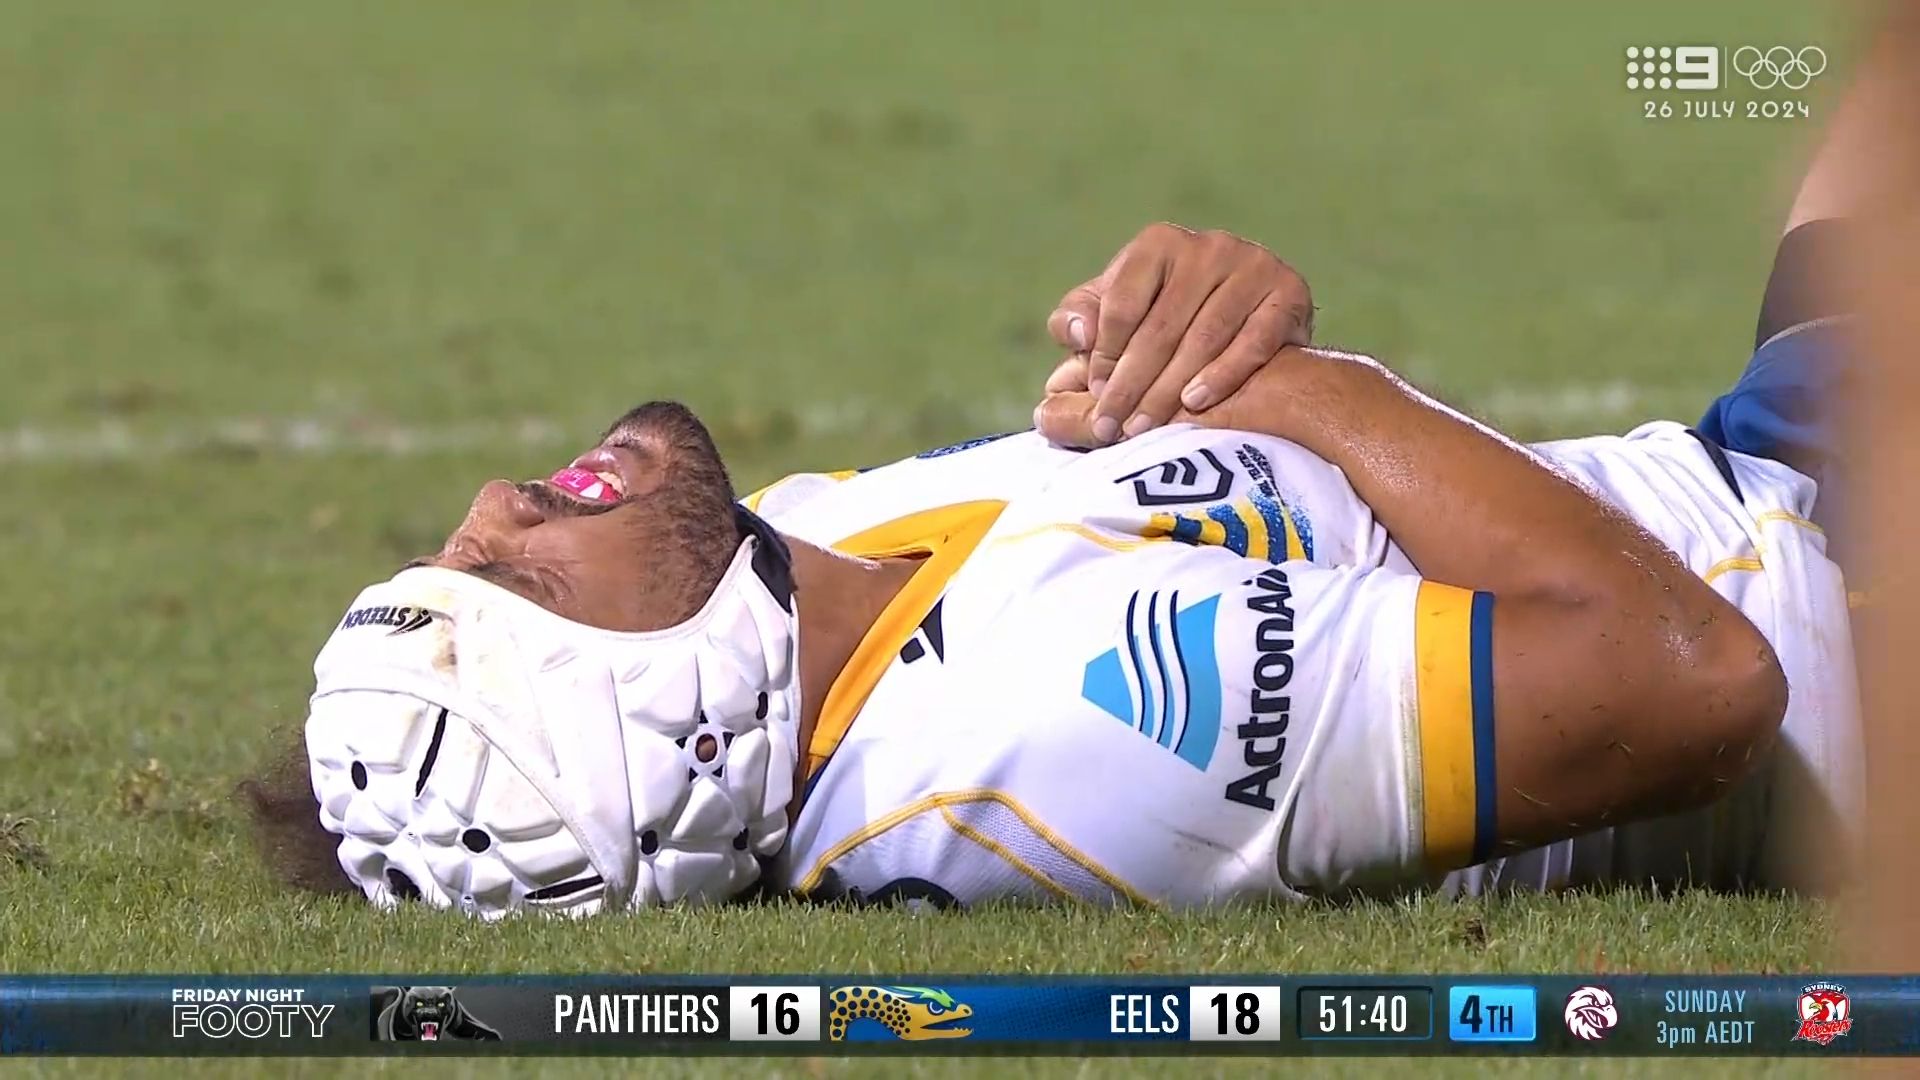 Eels enforcer Kelma Tuilagi suffers dislocated shoulder inflicting 'tackle of the season' on Liam Martin